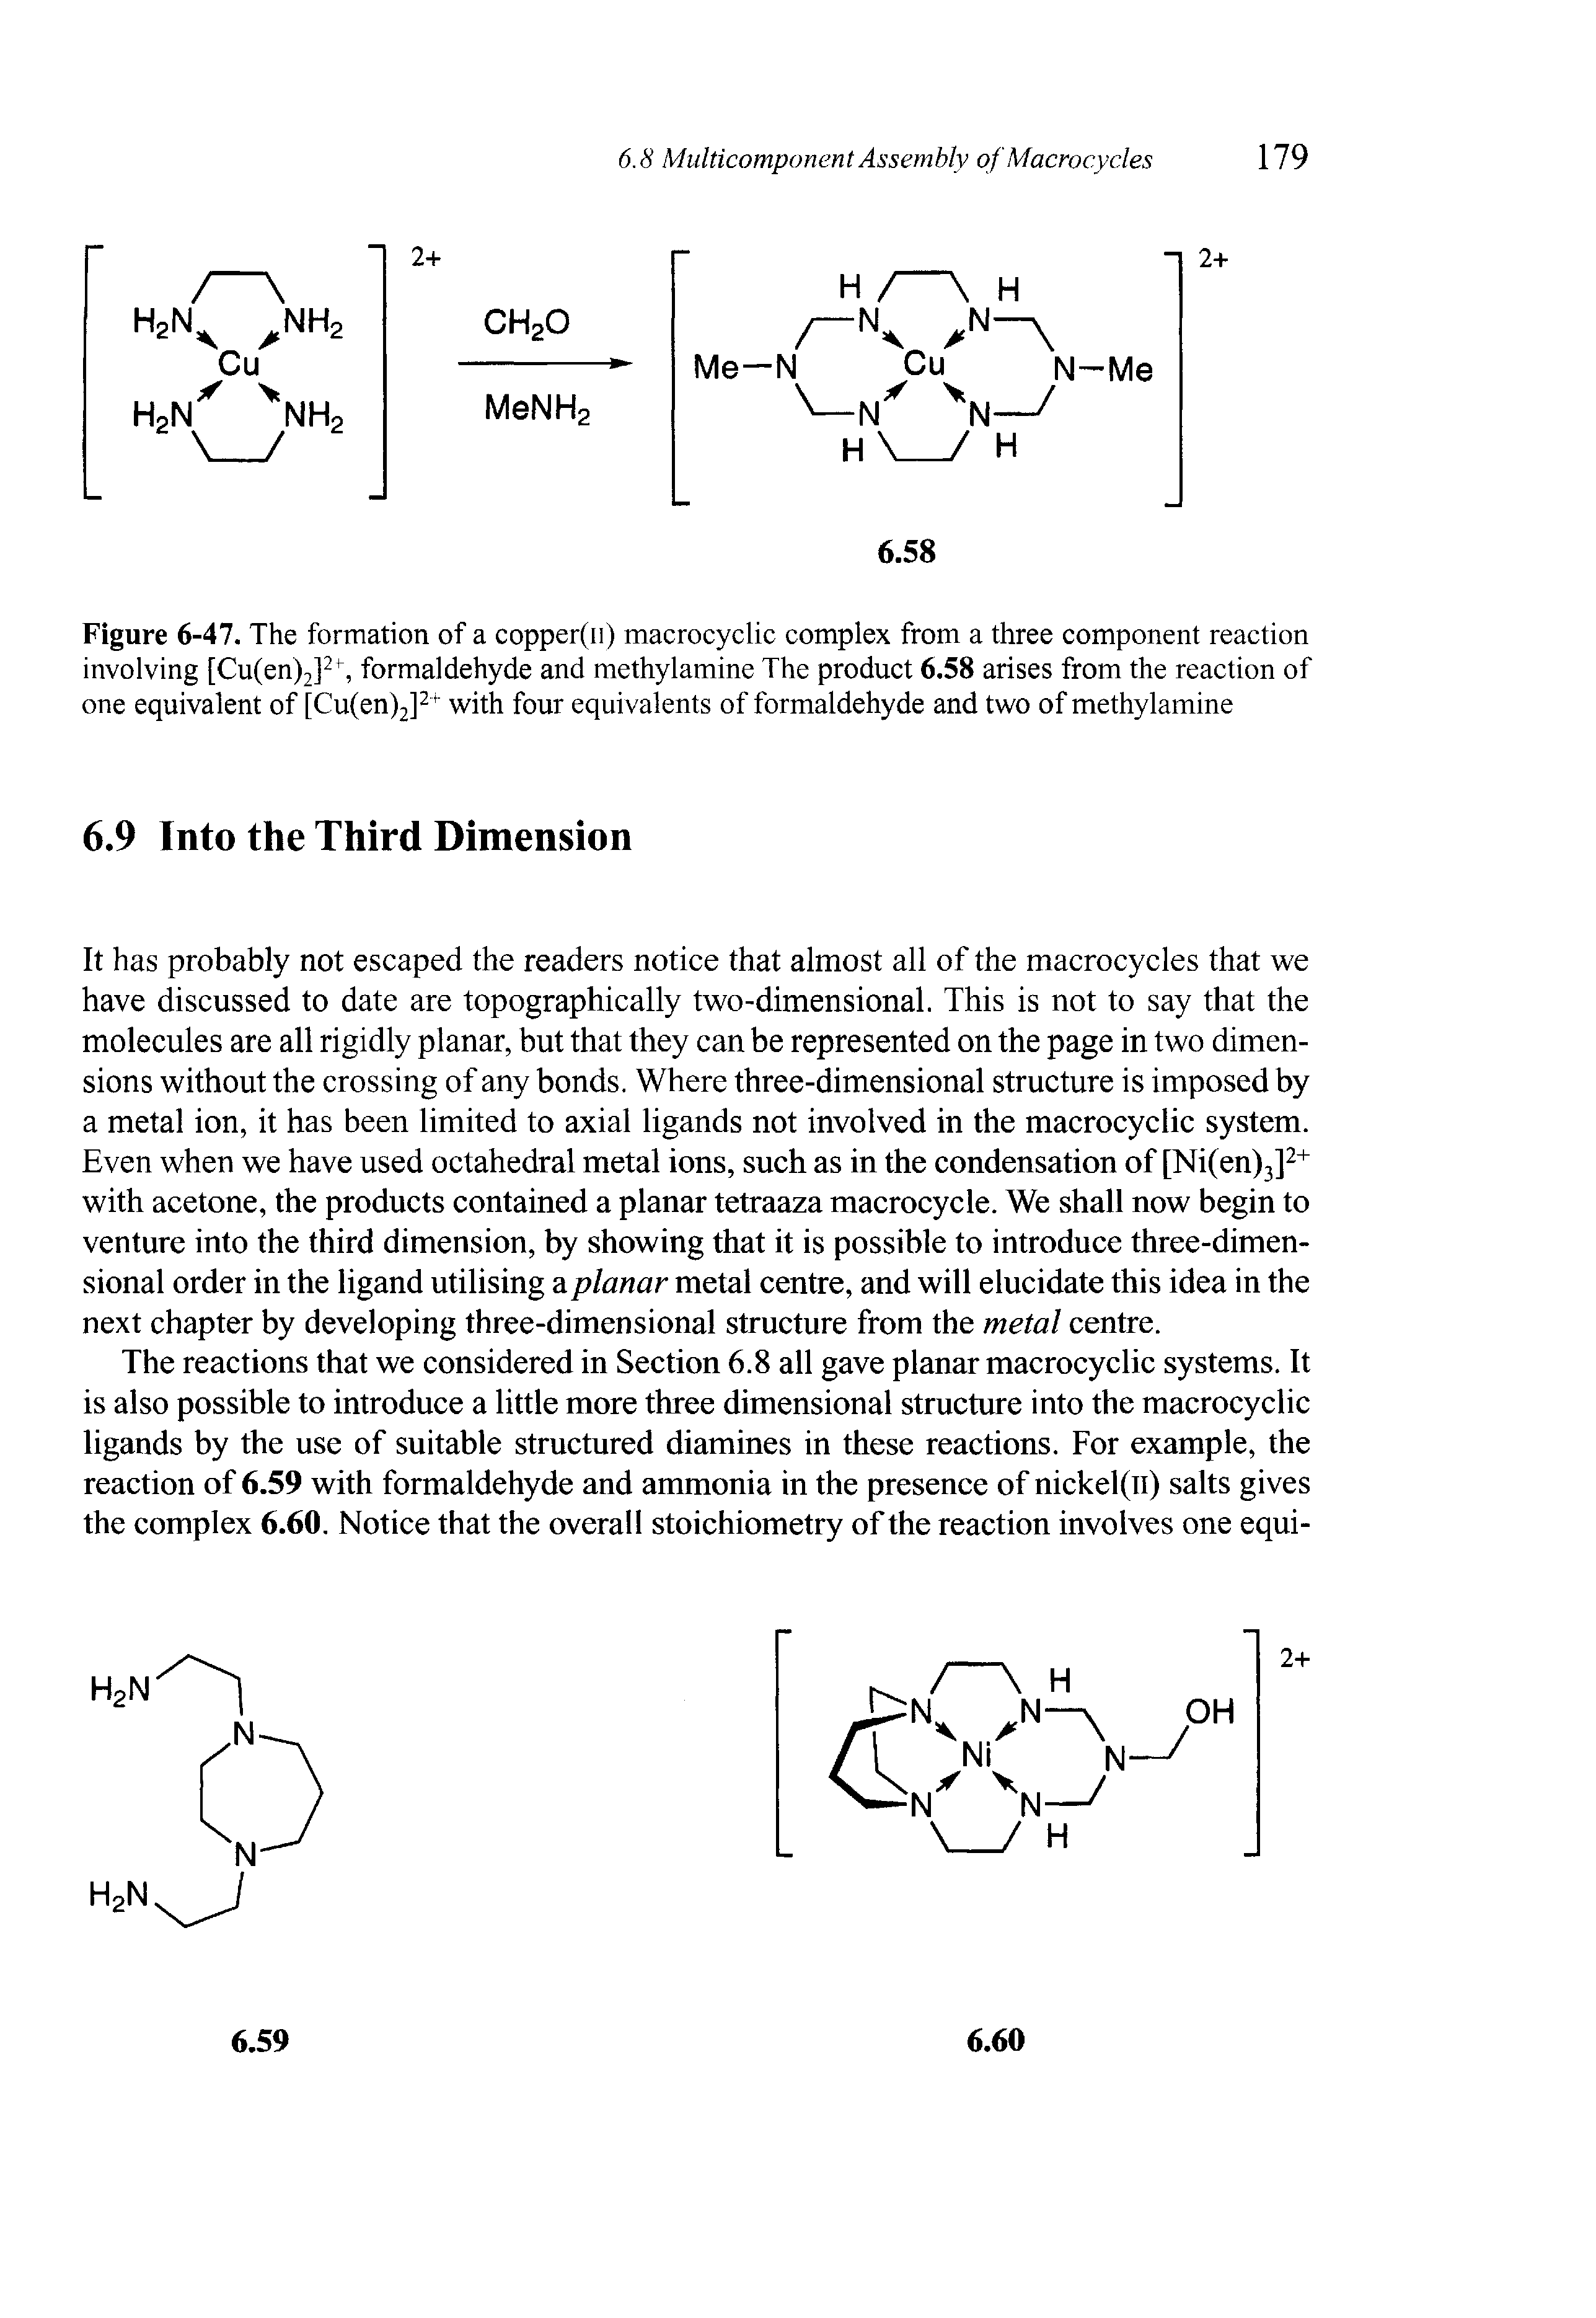 Figure 6-47. The formation of a copper(n) macrocyclic complex from a three component reaction involving [Cu(en)2]2f, formaldehyde and methylamine The product 6.58 arises from the reaction of one equivalent of [Cu(en)2]2+ with four equivalents of formaldehyde and two of methylamine...